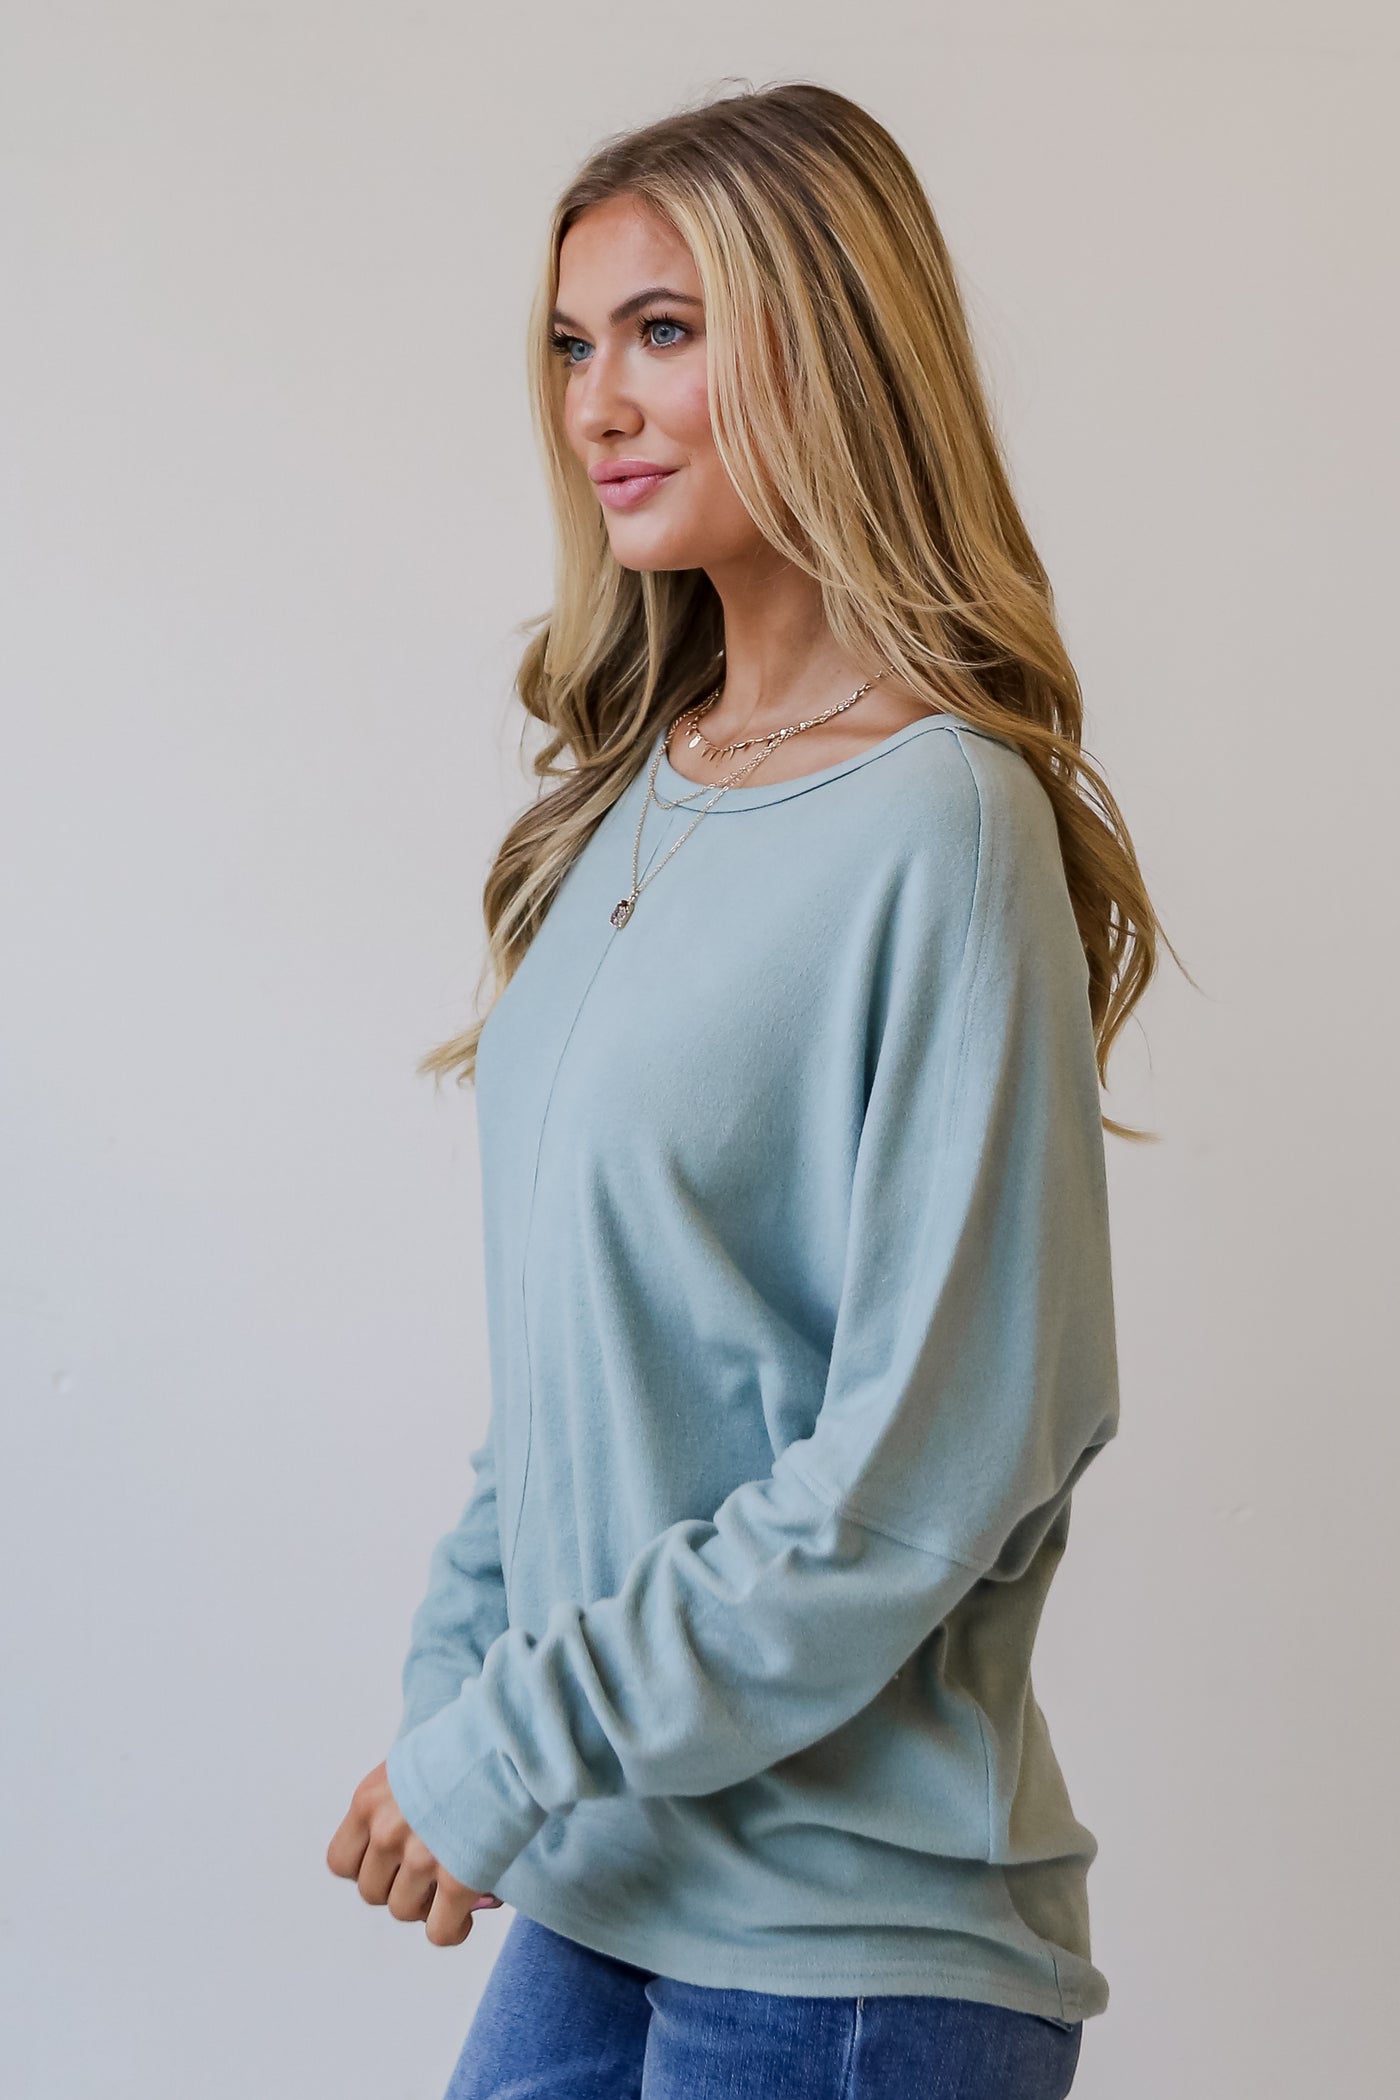 sage Brushed Knit Top side view